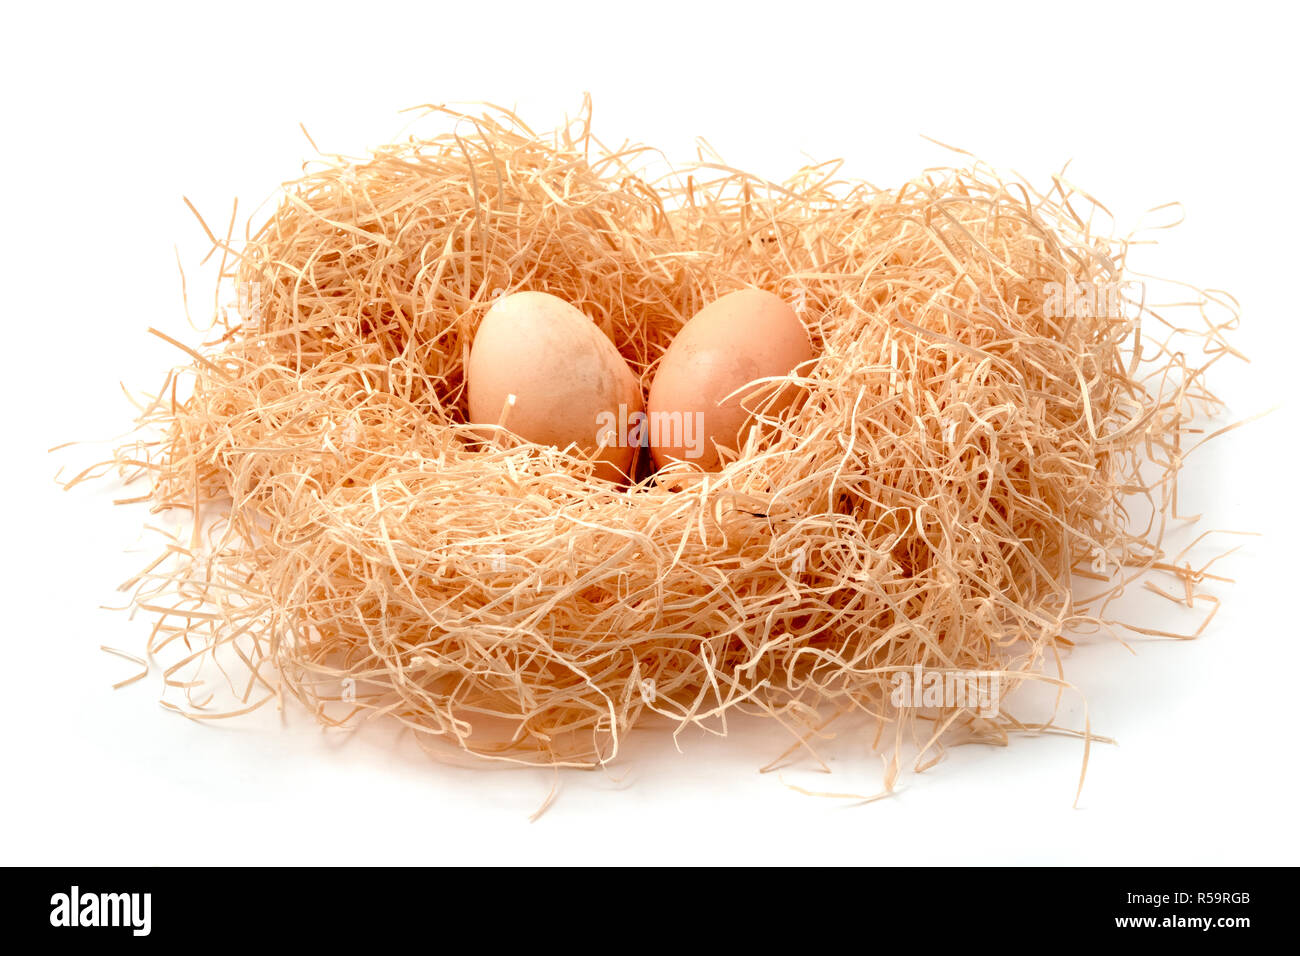 Eggs in a straw nest on a white background Stock Photo